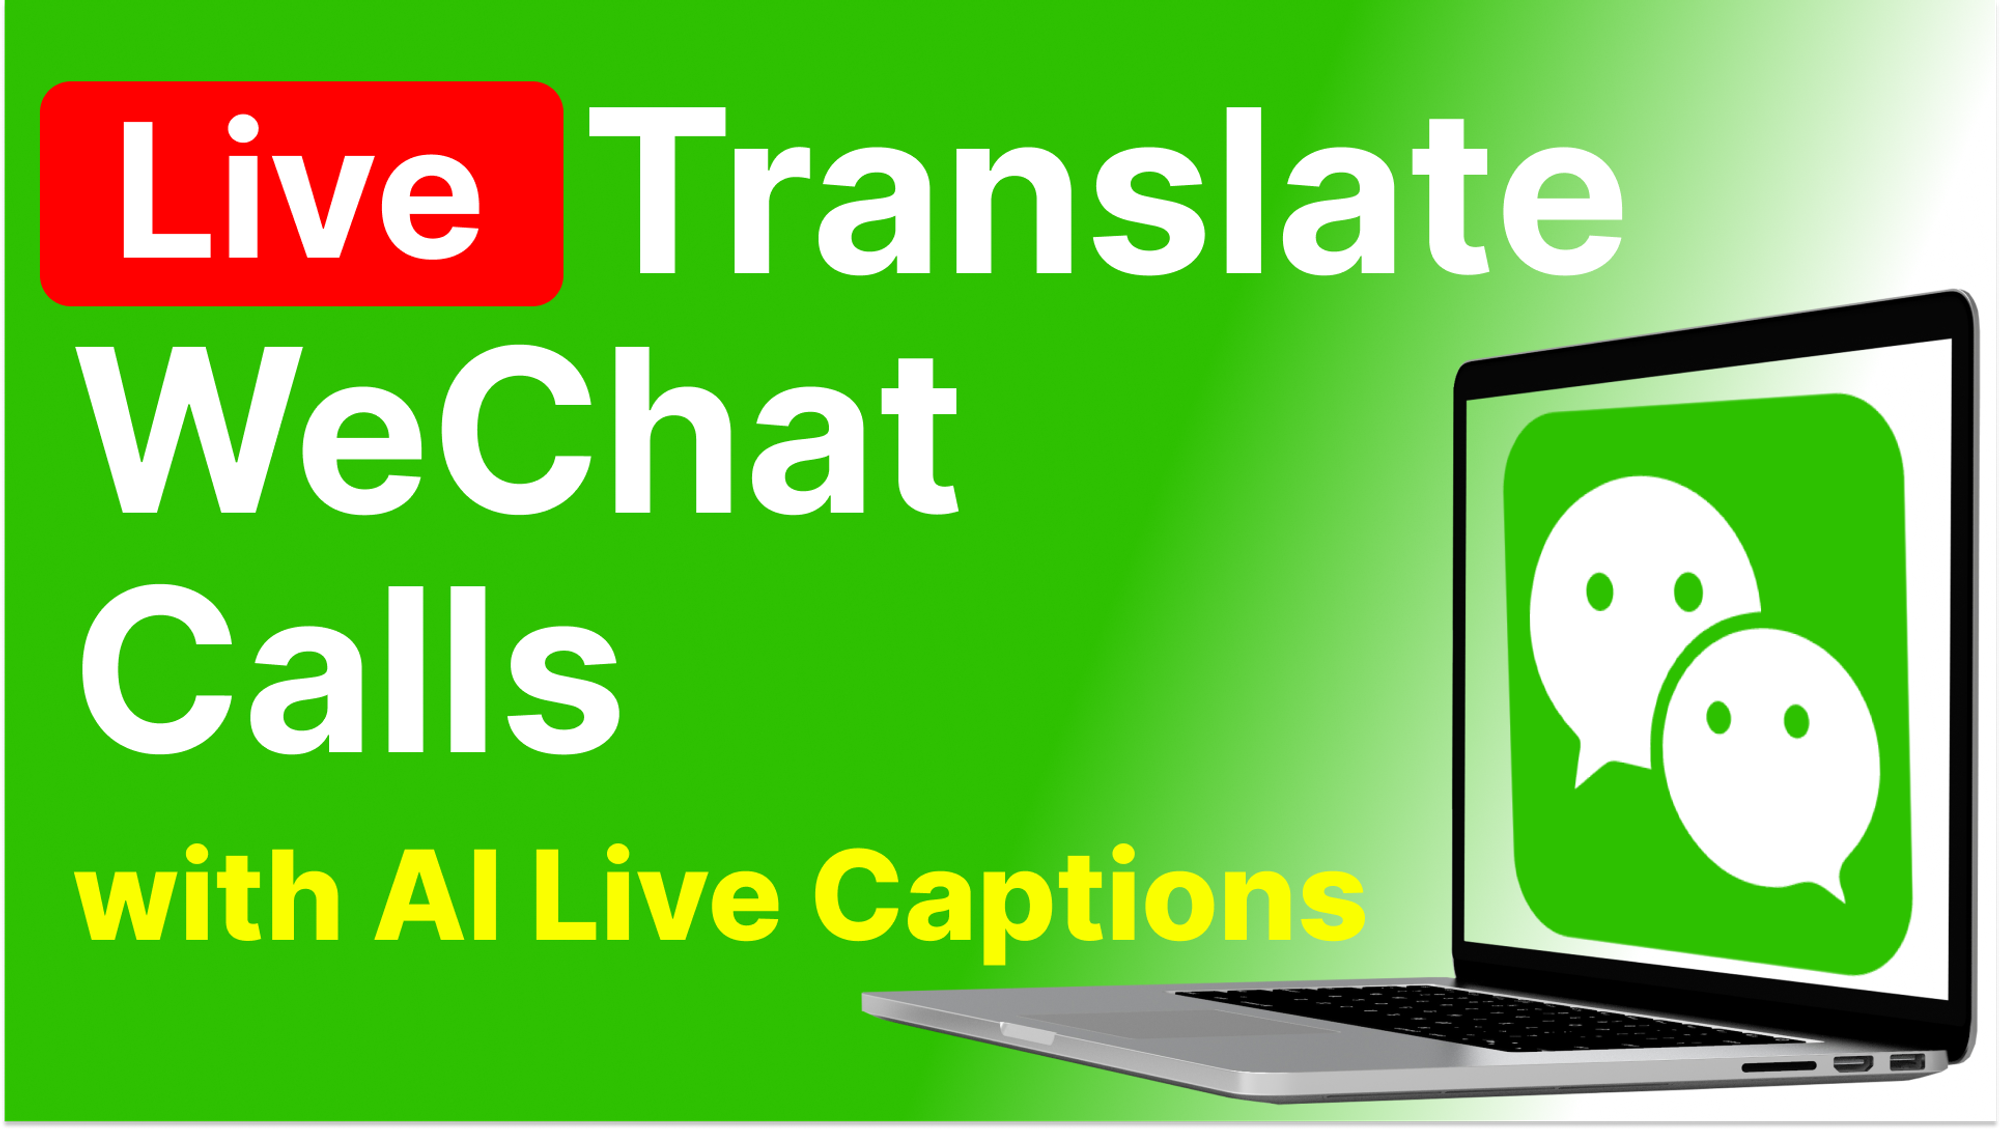 If you are in a WeChat call and cannot understand the person you are talking to, I am here for you! In this post, you’ll learn 5 easy steps to translate WeChat calls in real time with AI-powered live captions in your own language